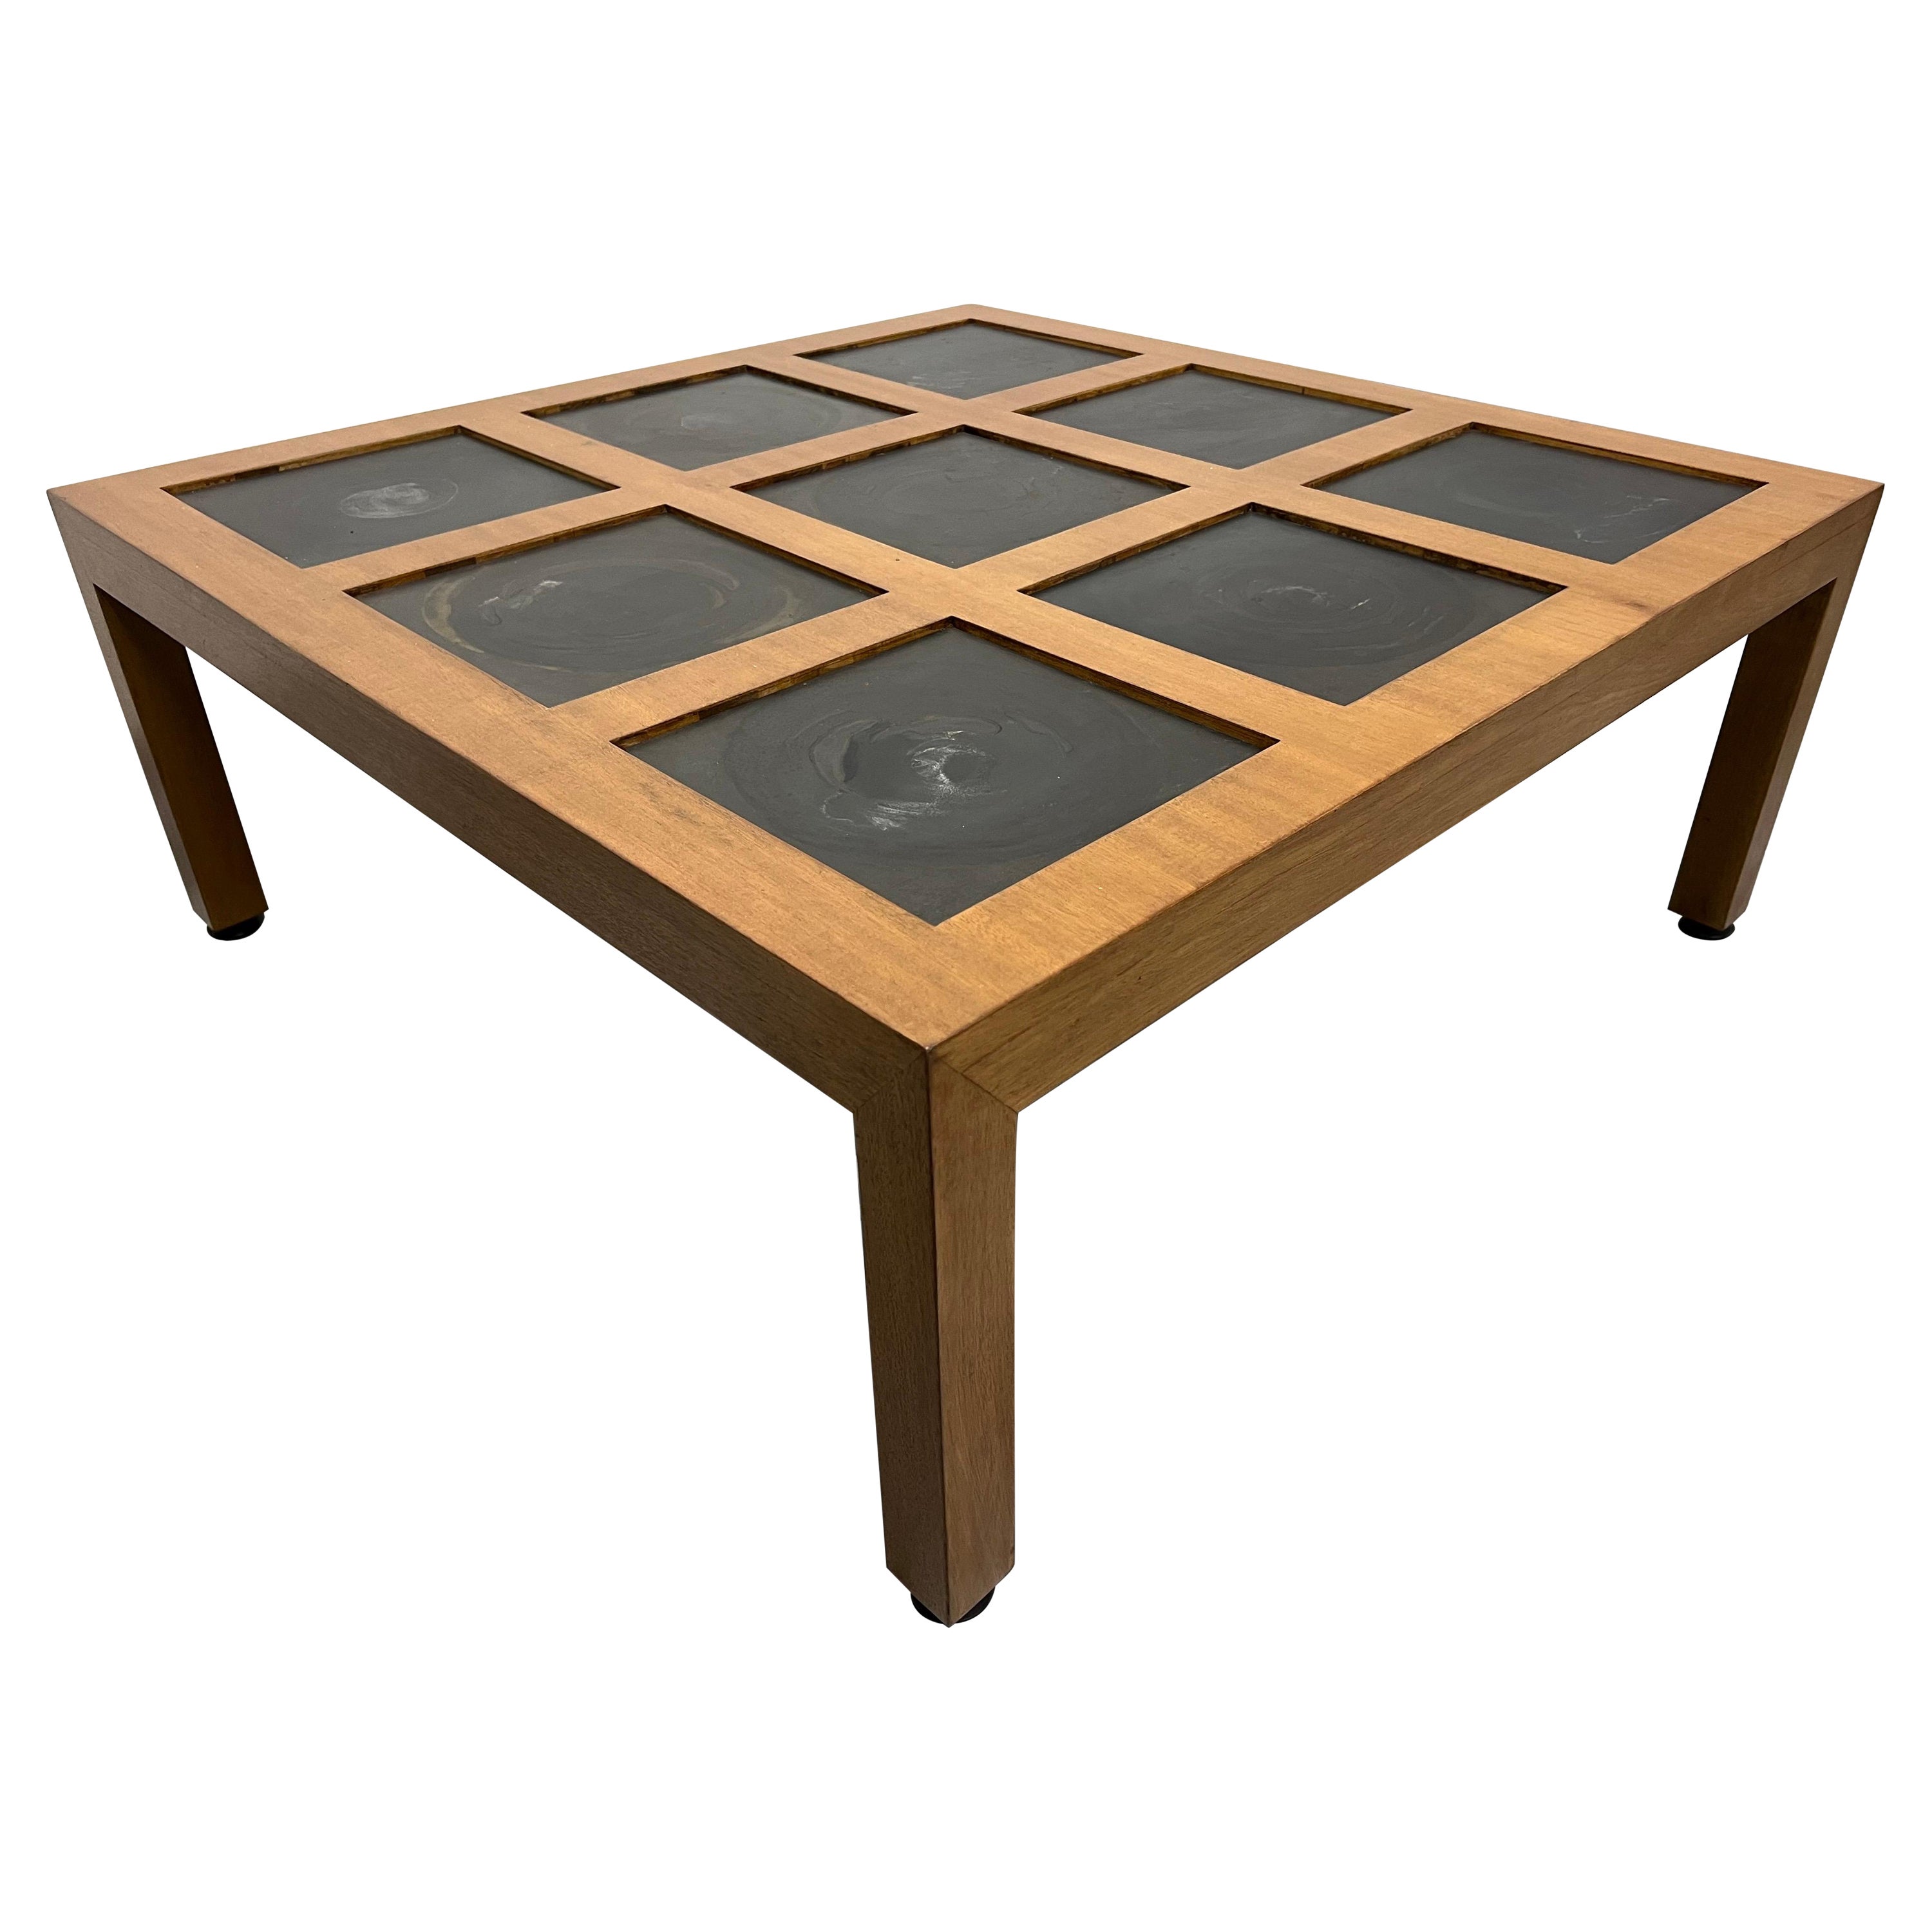 Edward Wormley Sandalwood and Blackened Steel Coffee Table for Dunbar, 1950s For Sale